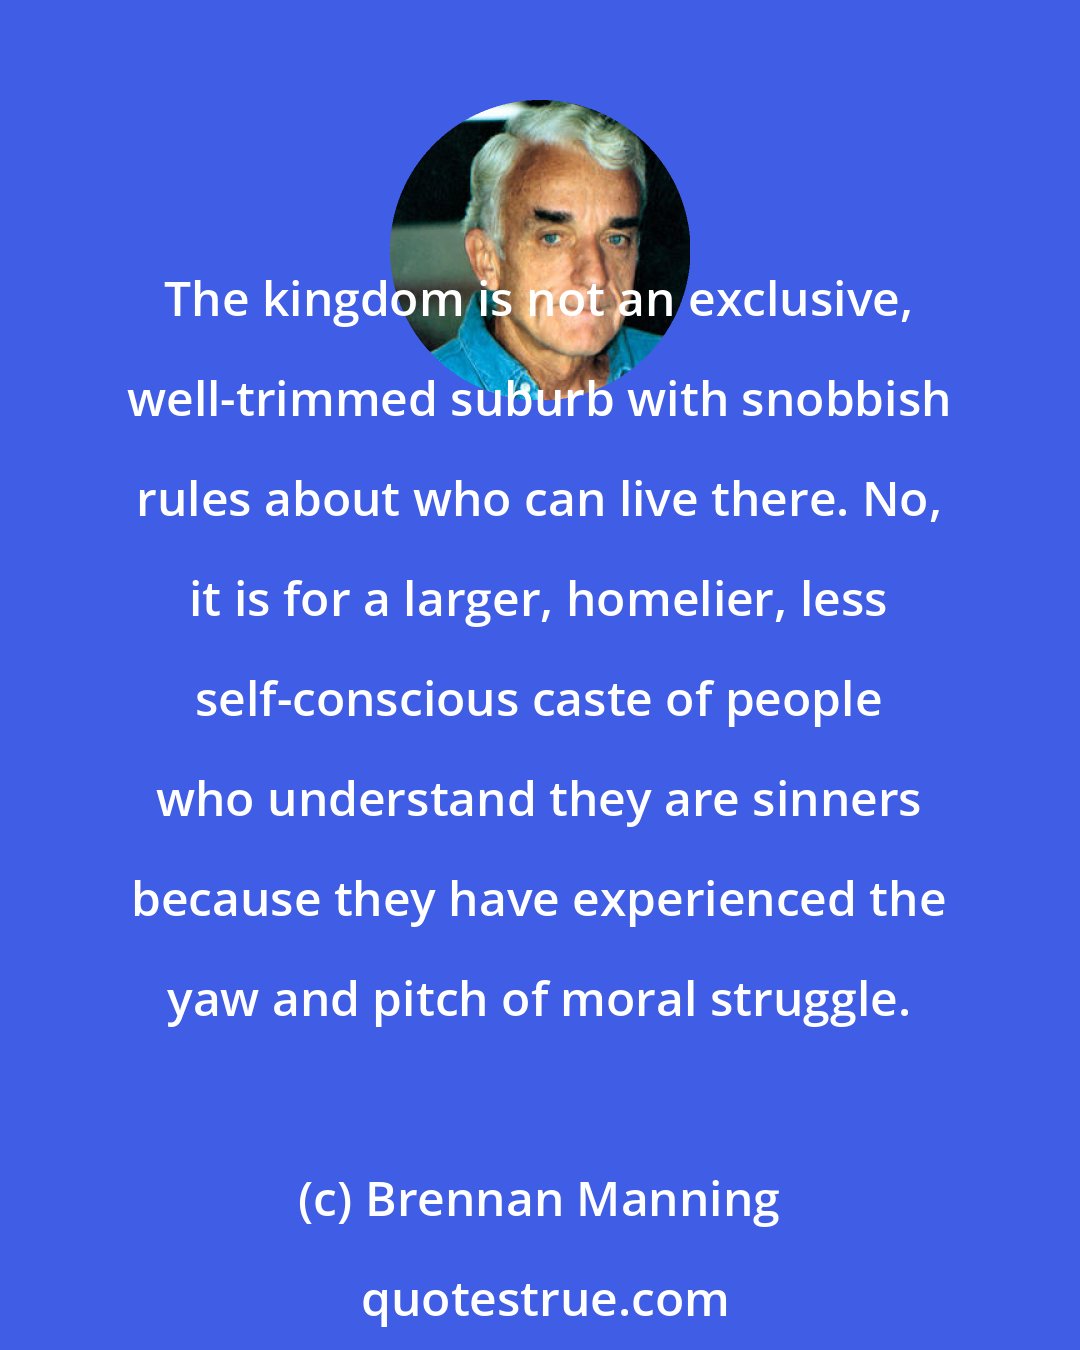 Brennan Manning: The kingdom is not an exclusive, well-trimmed suburb with snobbish rules about who can live there. No, it is for a larger, homelier, less self-conscious caste of people who understand they are sinners because they have experienced the yaw and pitch of moral struggle.